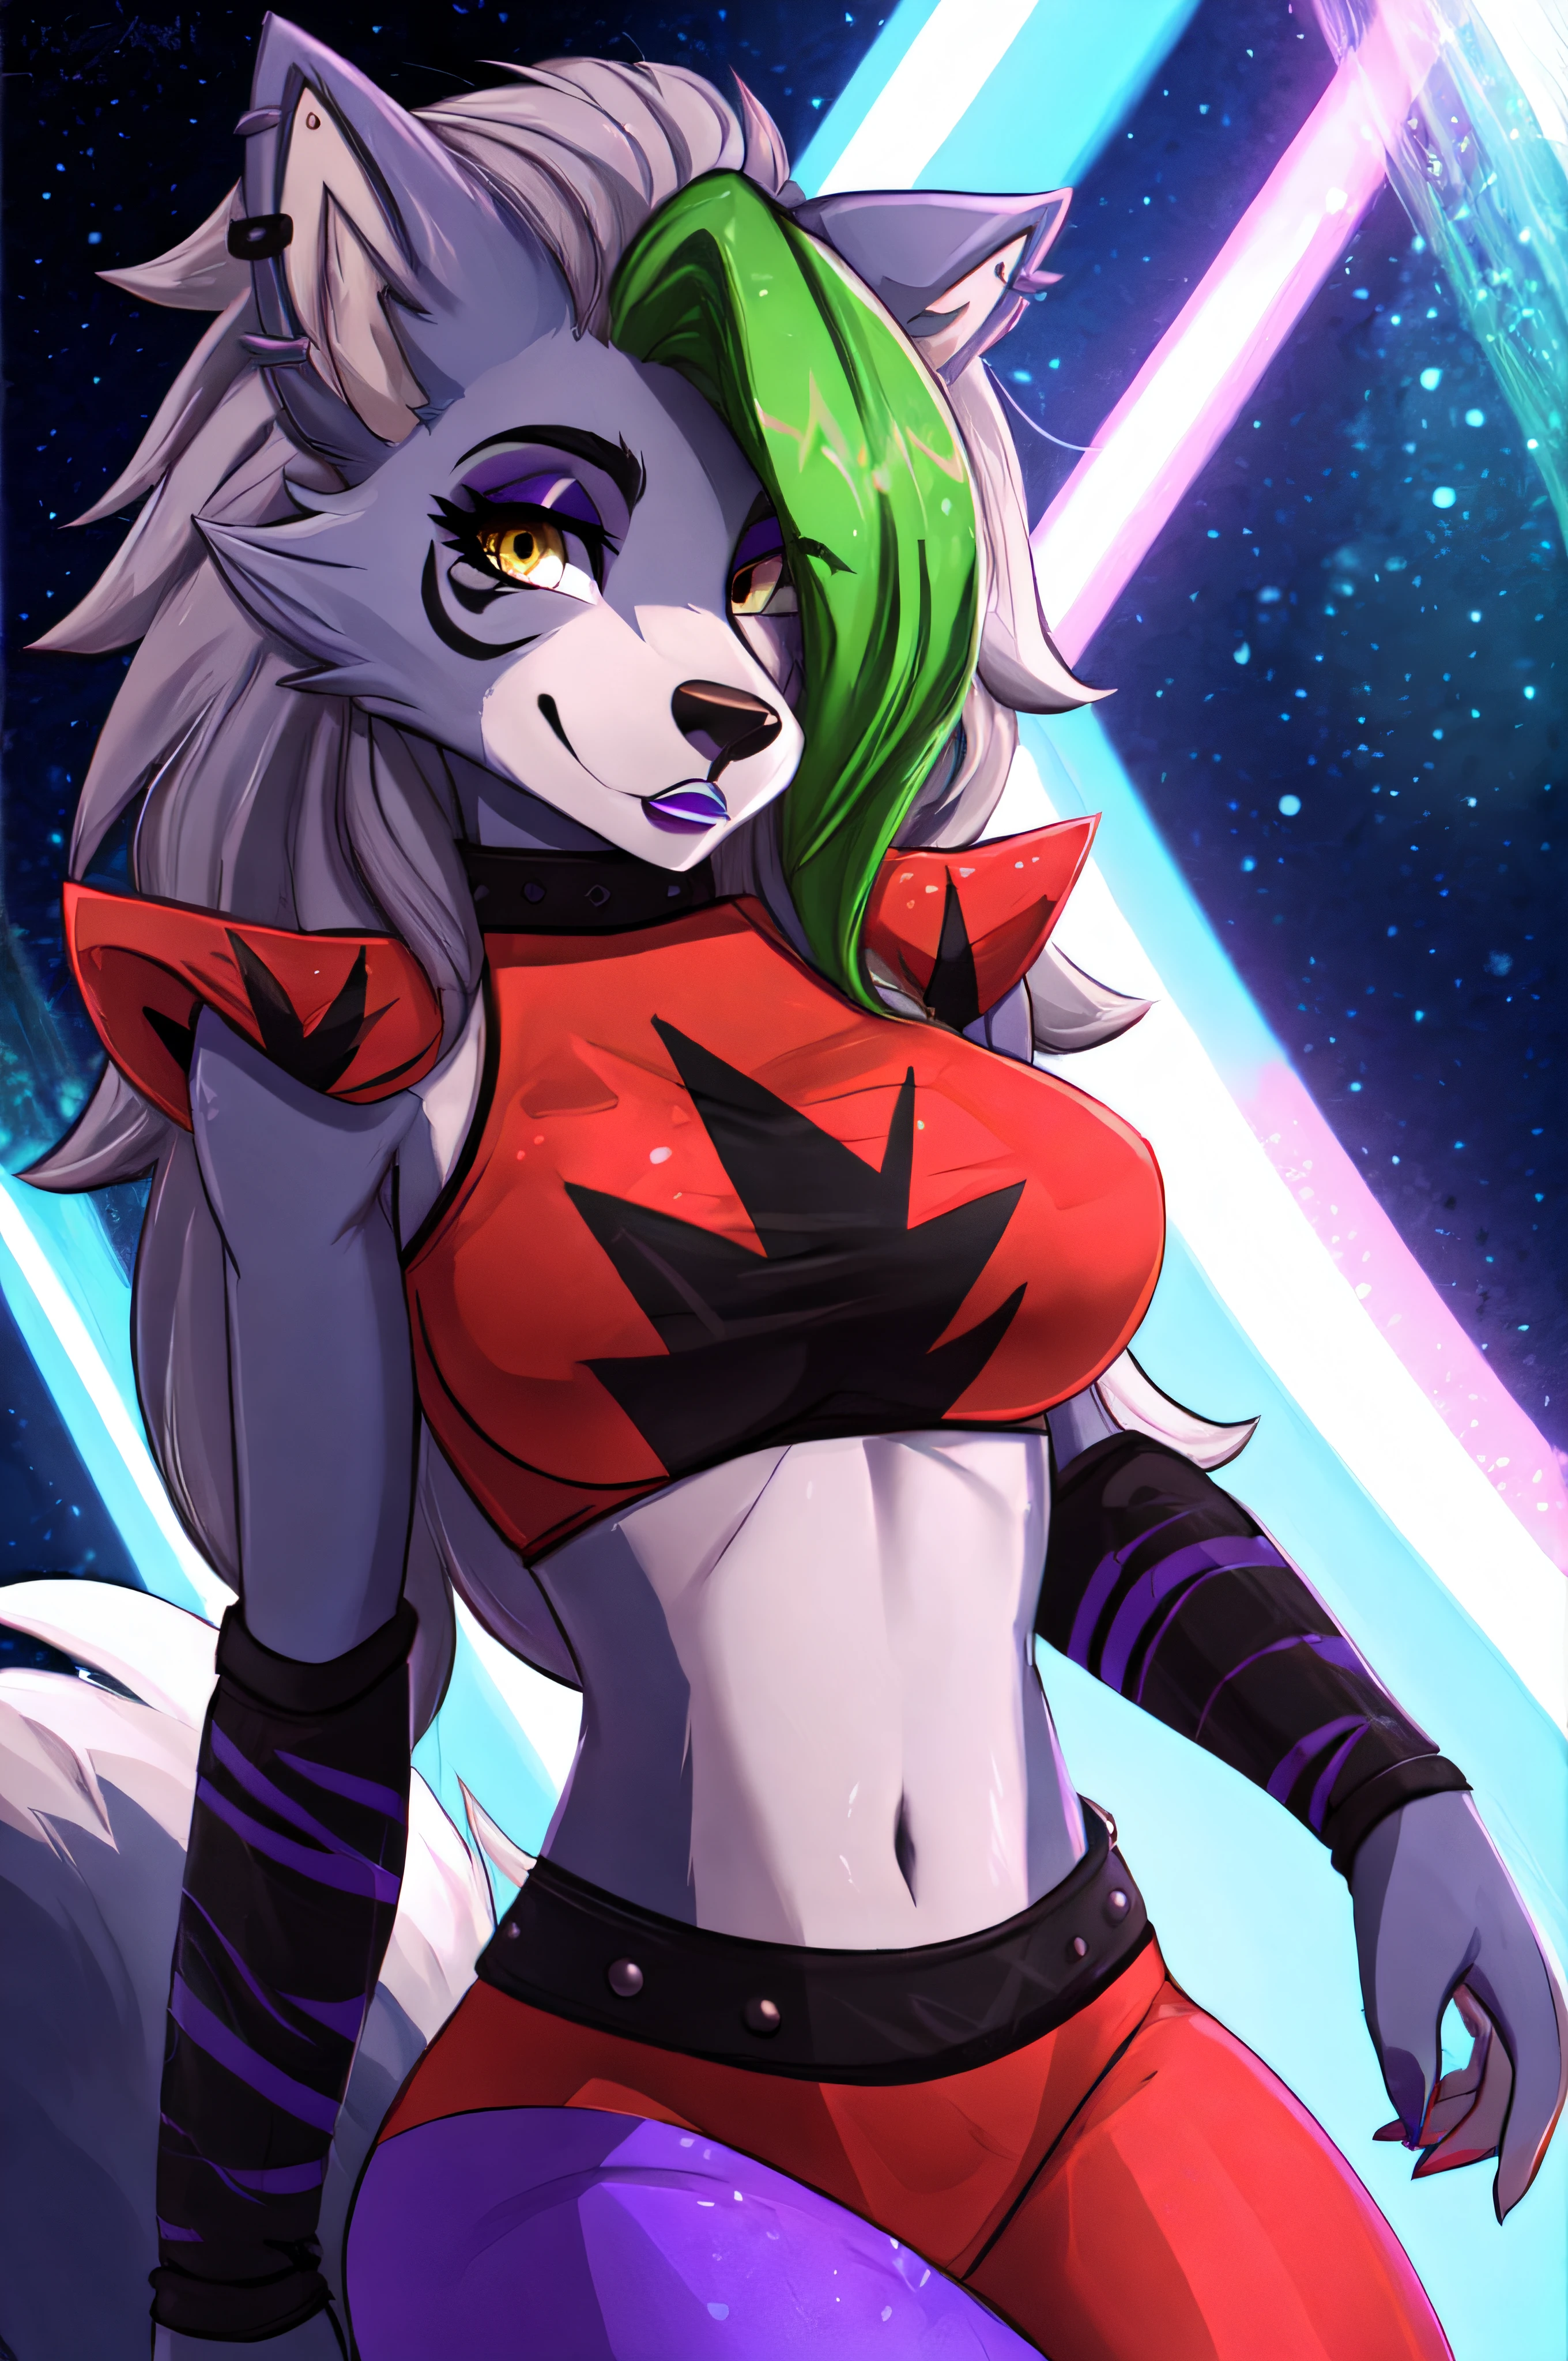 best quality, fnafroxanne, furry female, body fur, makeup, wolf ears, wolf tail, grey hair, green hair, yellow eyes, crop top,